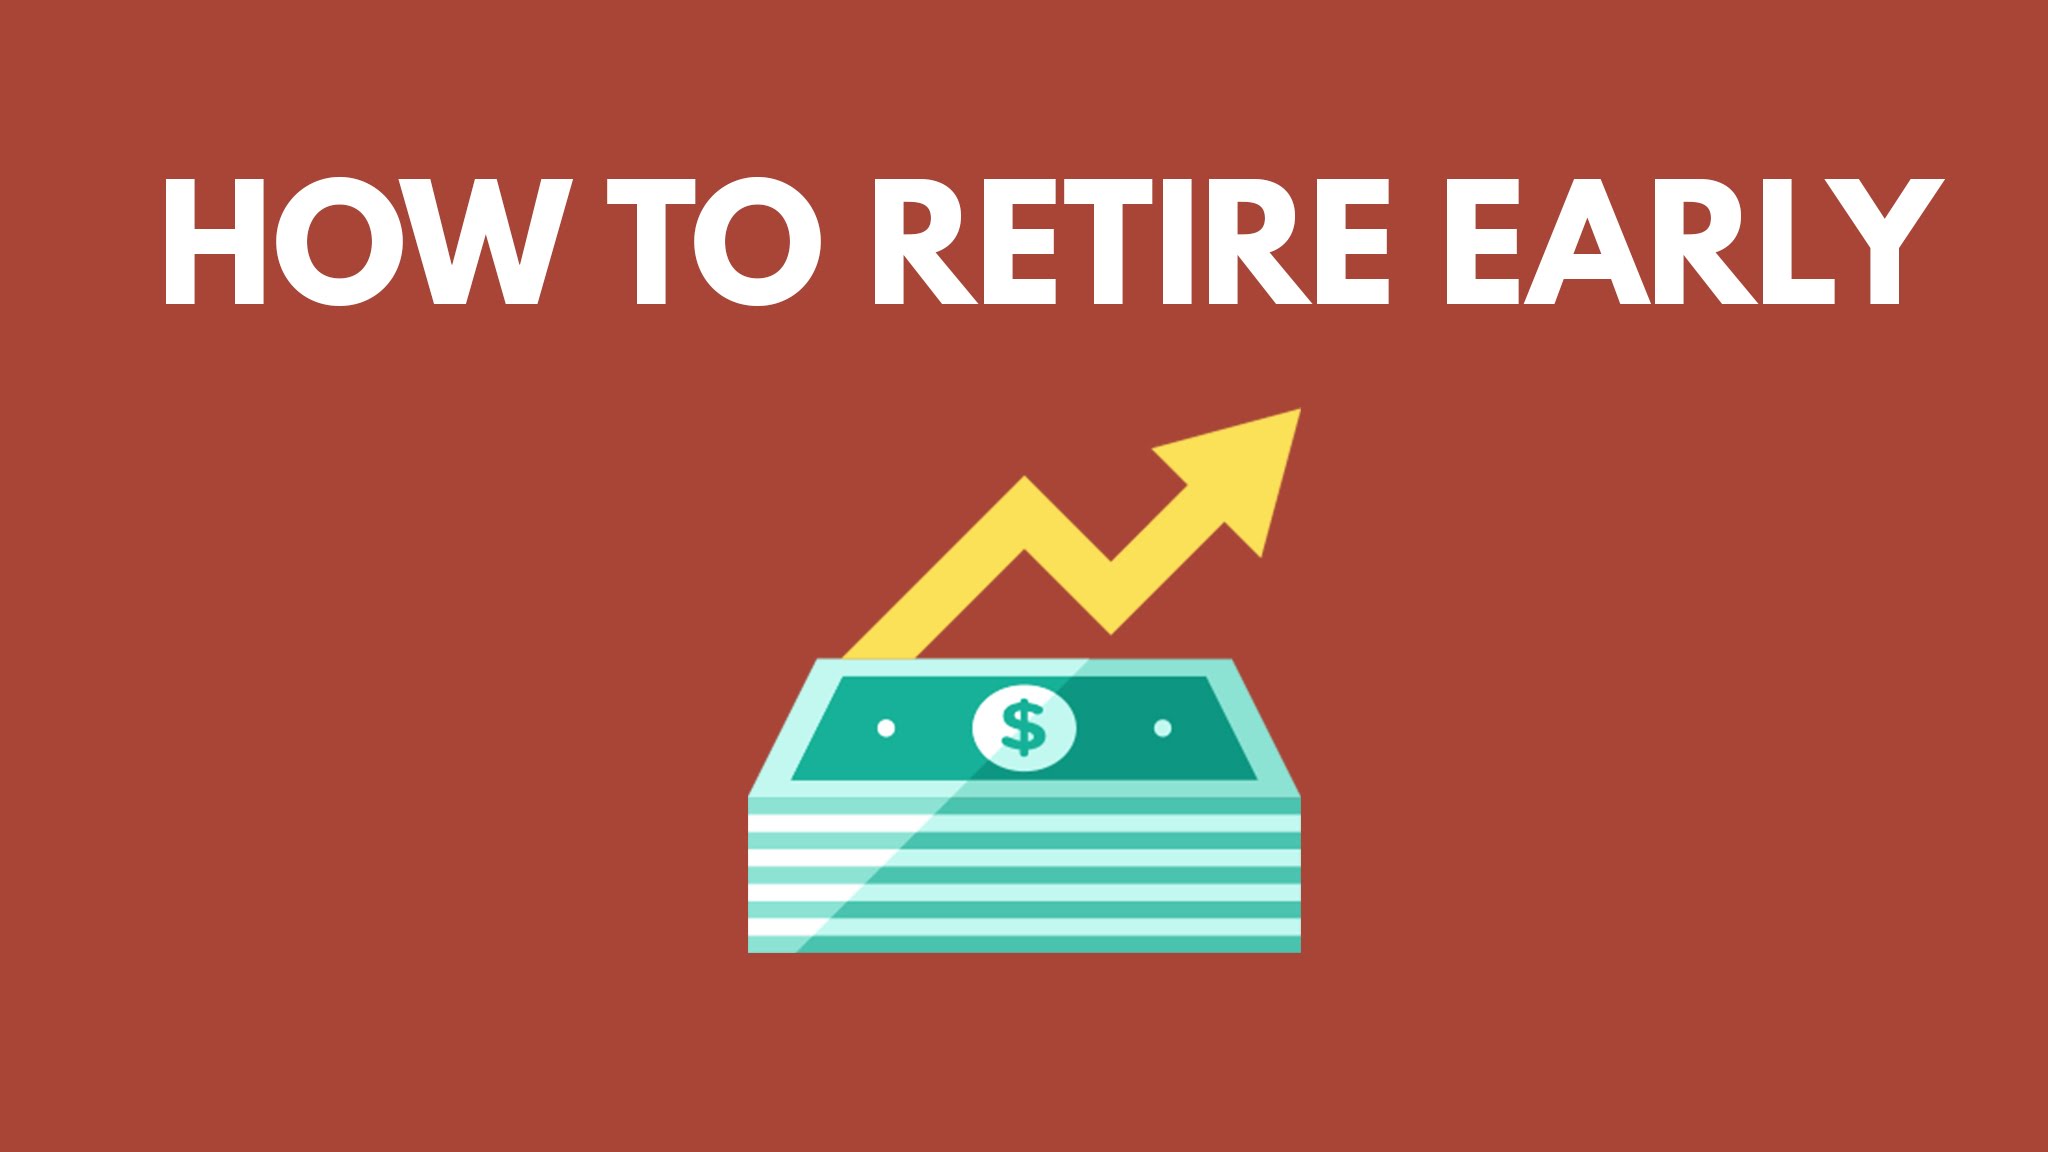 Retire Early On Over $5,000 A Month For A Once Only $197 – No Selling Or Recruiting Needed!